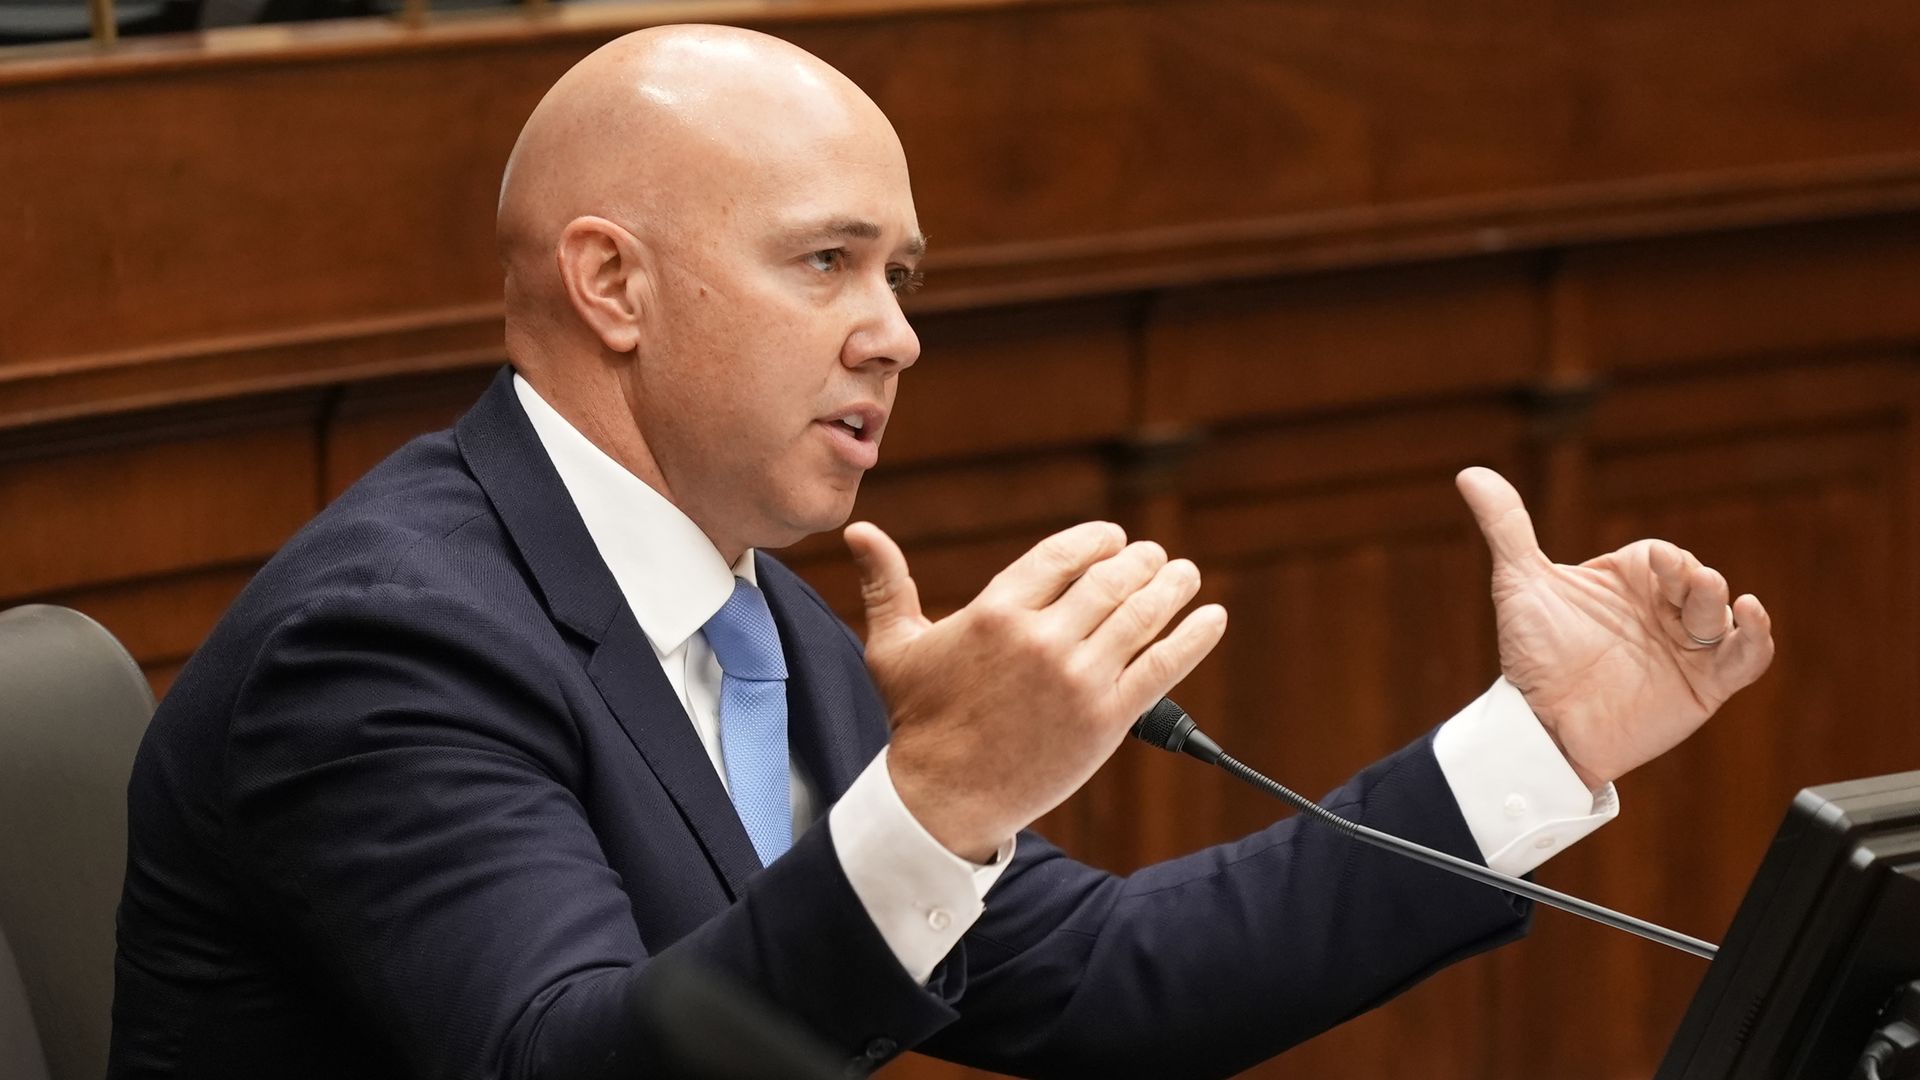 Brian Mast gestures while wearing a suit